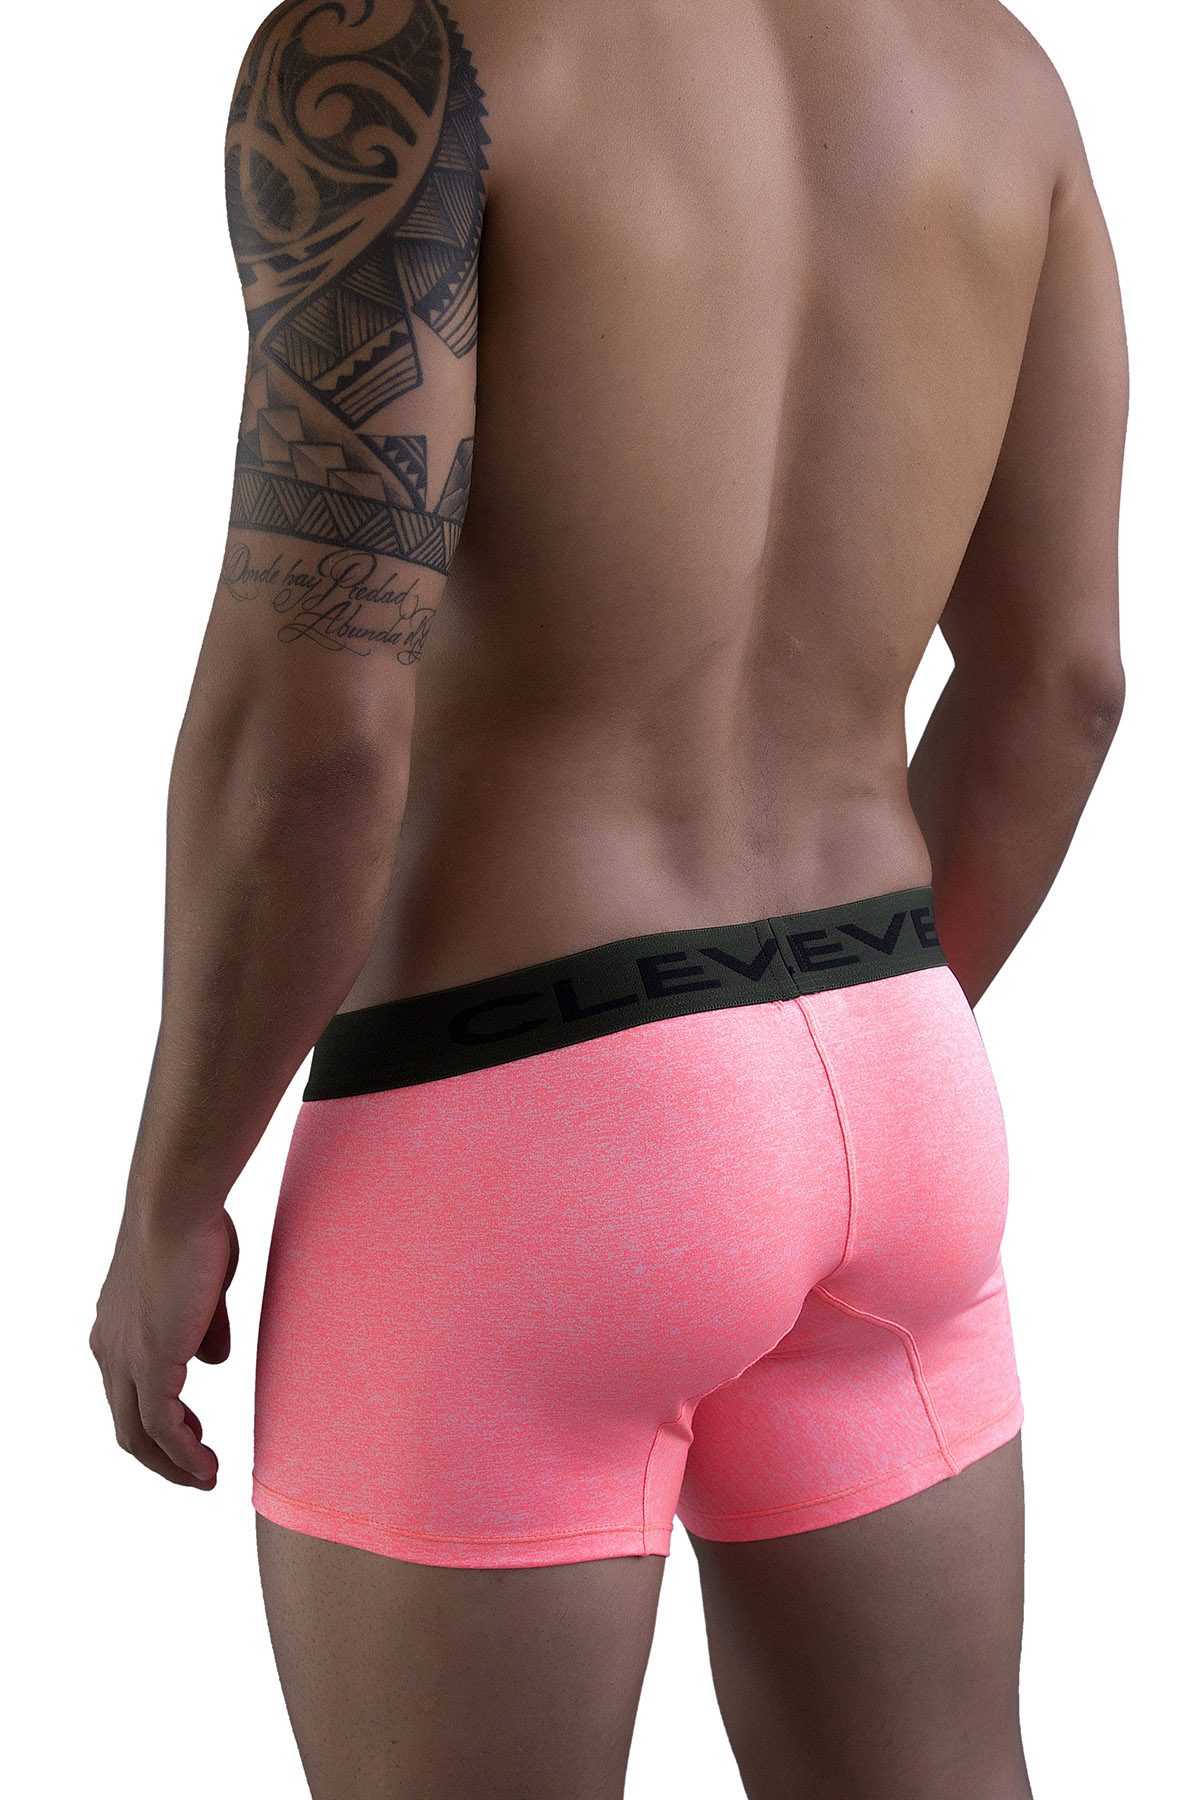 Clever Coral SpaceDye Limited Edition Neon Trunk